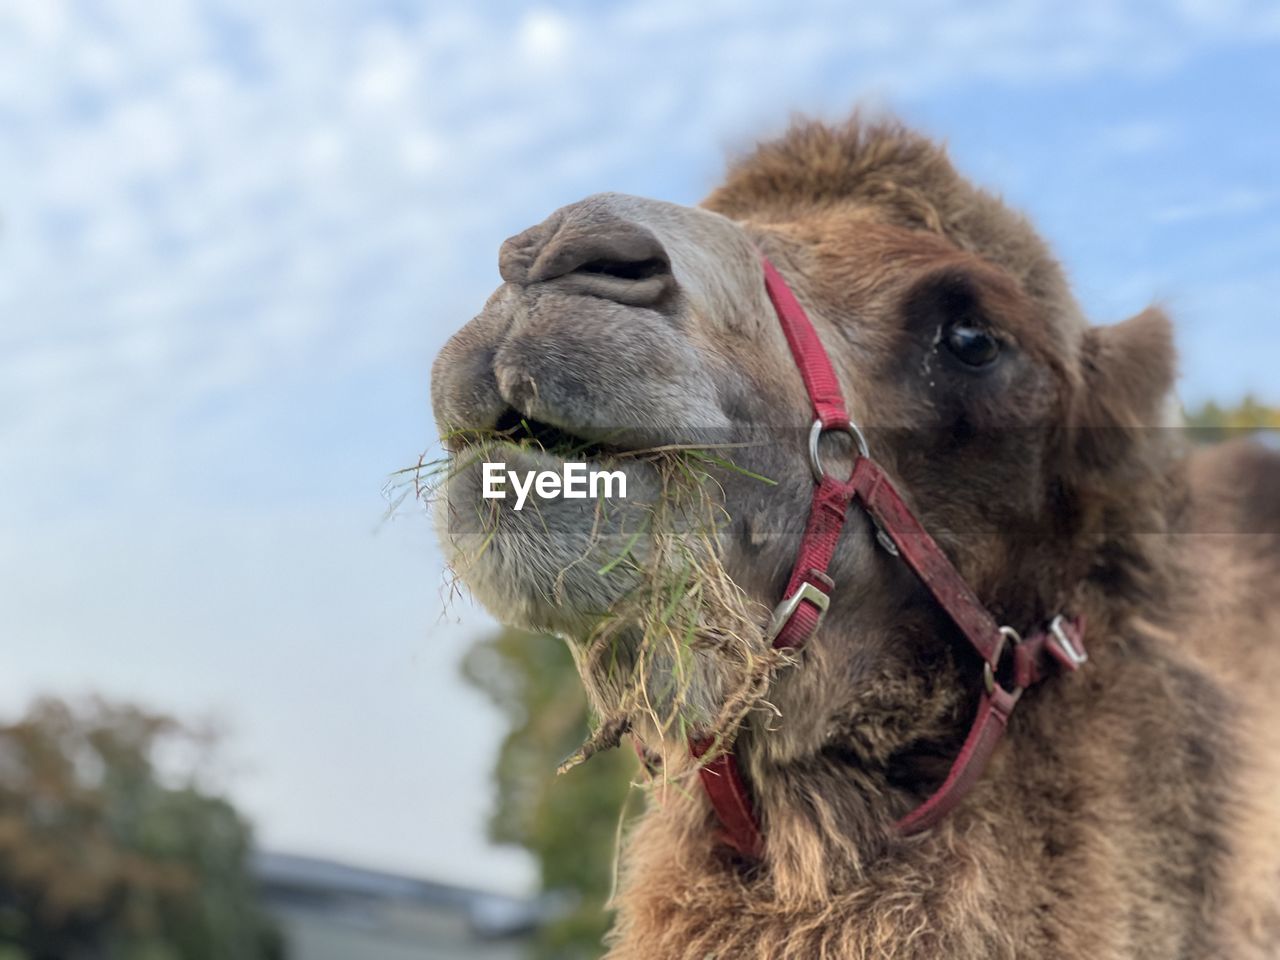 camel, animal themes, animal, mammal, one animal, arabian camel, domestic animals, pet, animal body part, animal head, close-up, working animal, focus on foreground, no people, livestock, nature, bridle, sky, day, portrait, outdoors, animal hair, agriculture, animal mouth